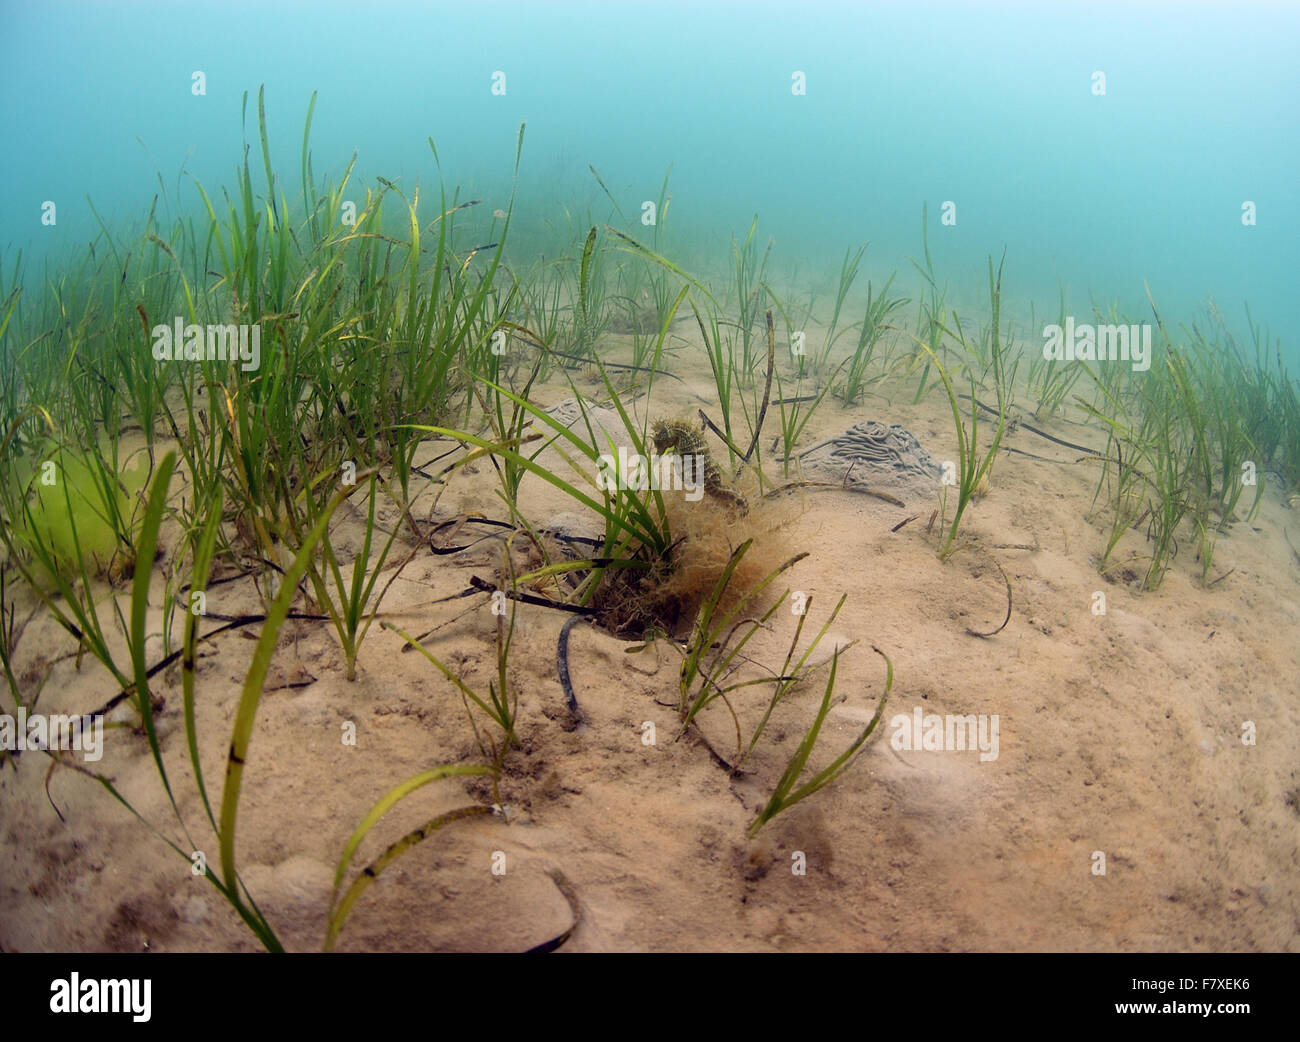 Long-snouted Seahorse (Hippocampus guttulatus) adult, in Eelgrass (Zostera marina) bed habitat, Studland Bay, Isle of Purbeck, Dorset, England, August Stock Photo